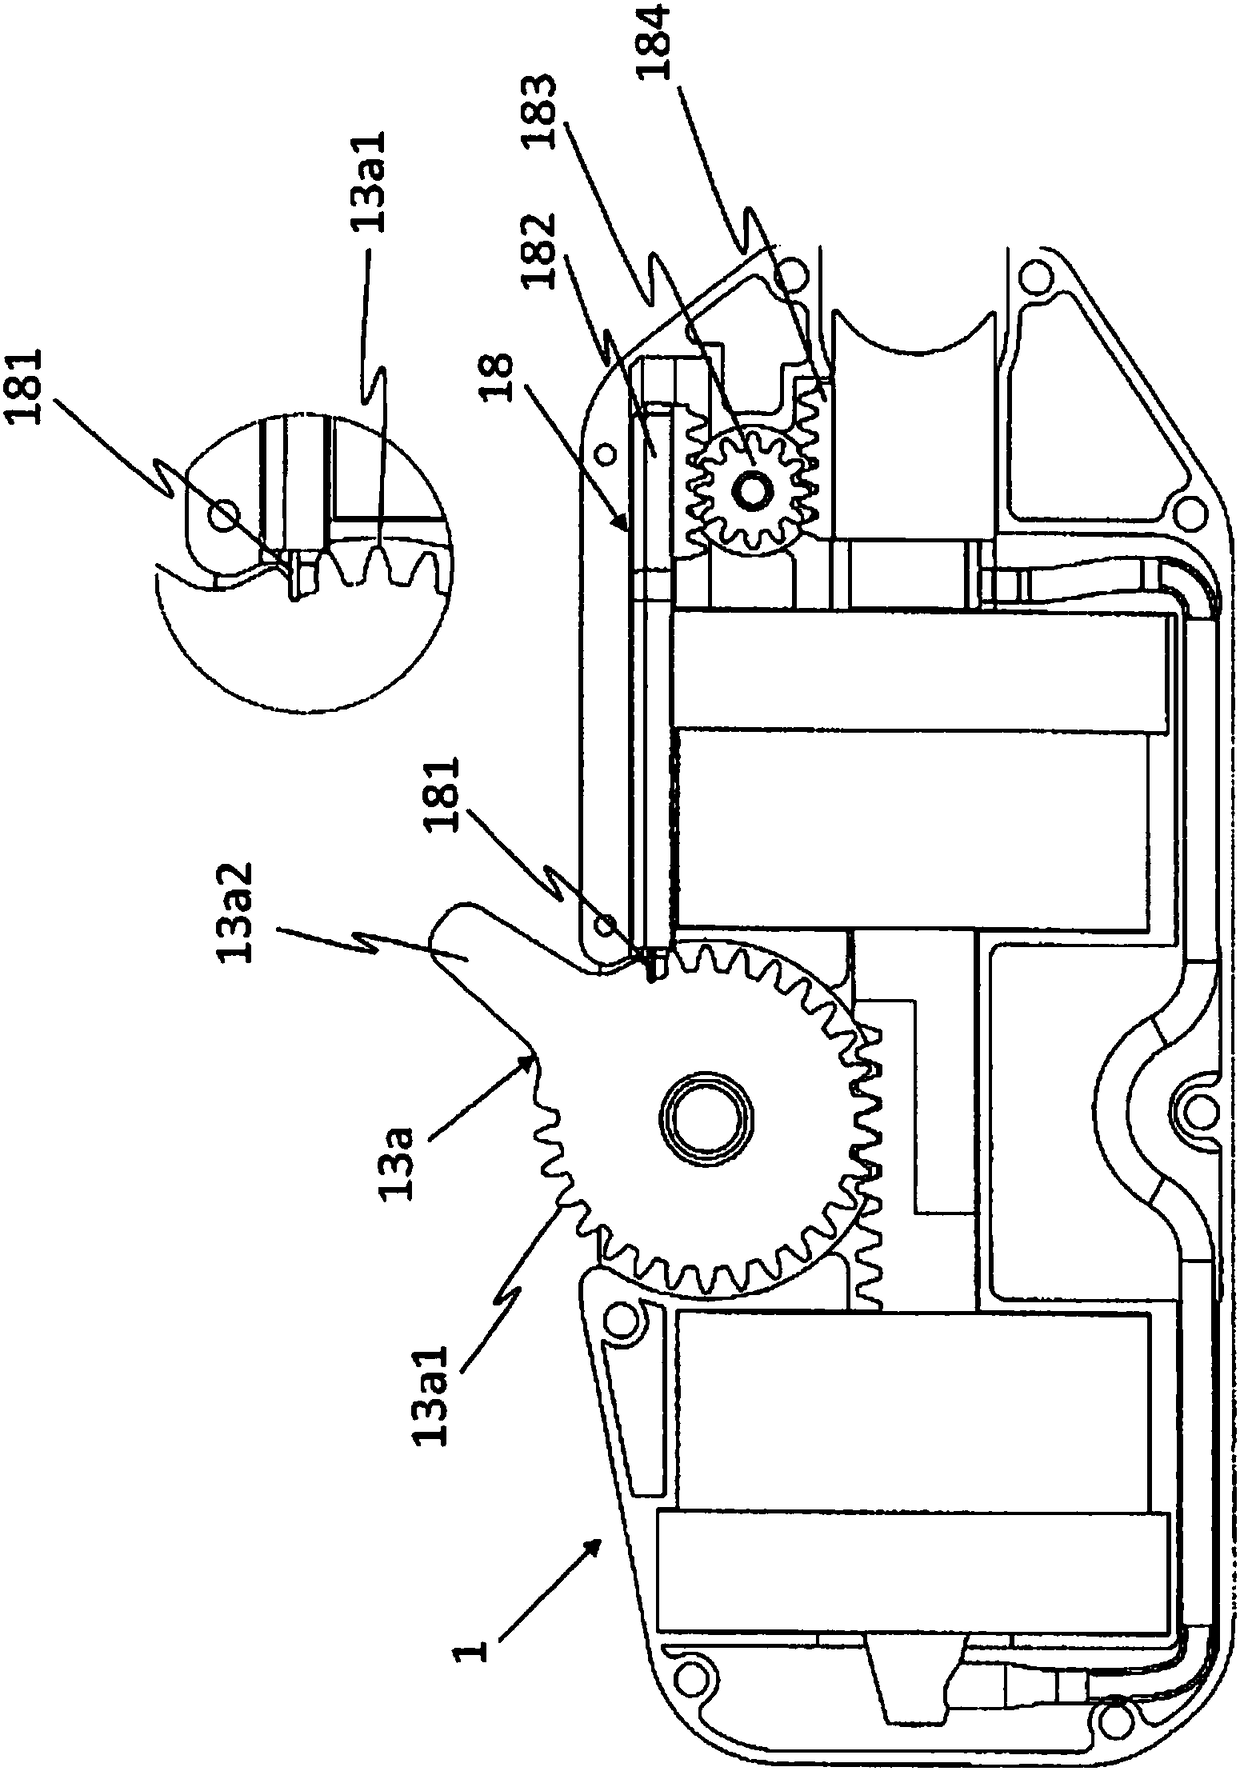 Device and method for filling an electric cigarette